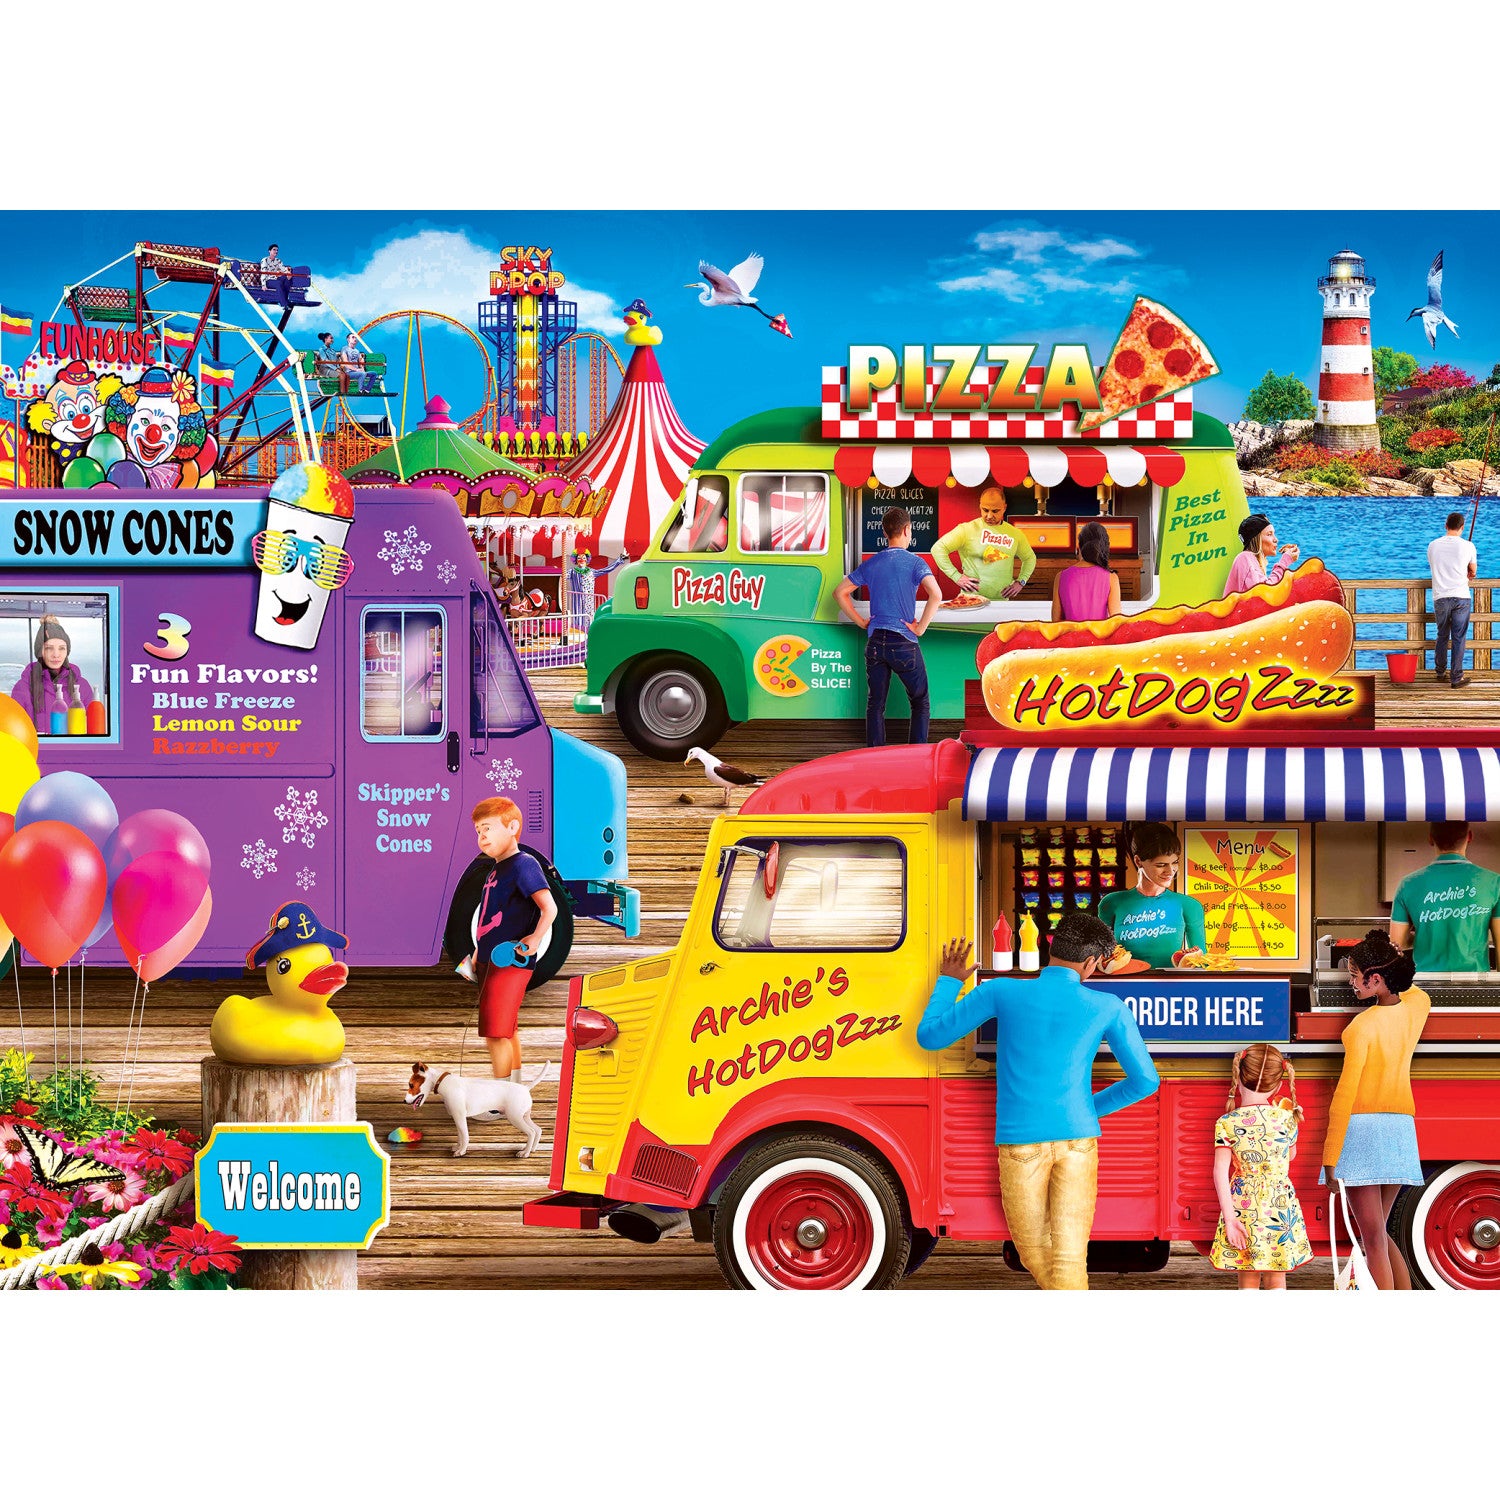 Food Truck Roundup - Carnival Treats 1000 Piece Puzzle